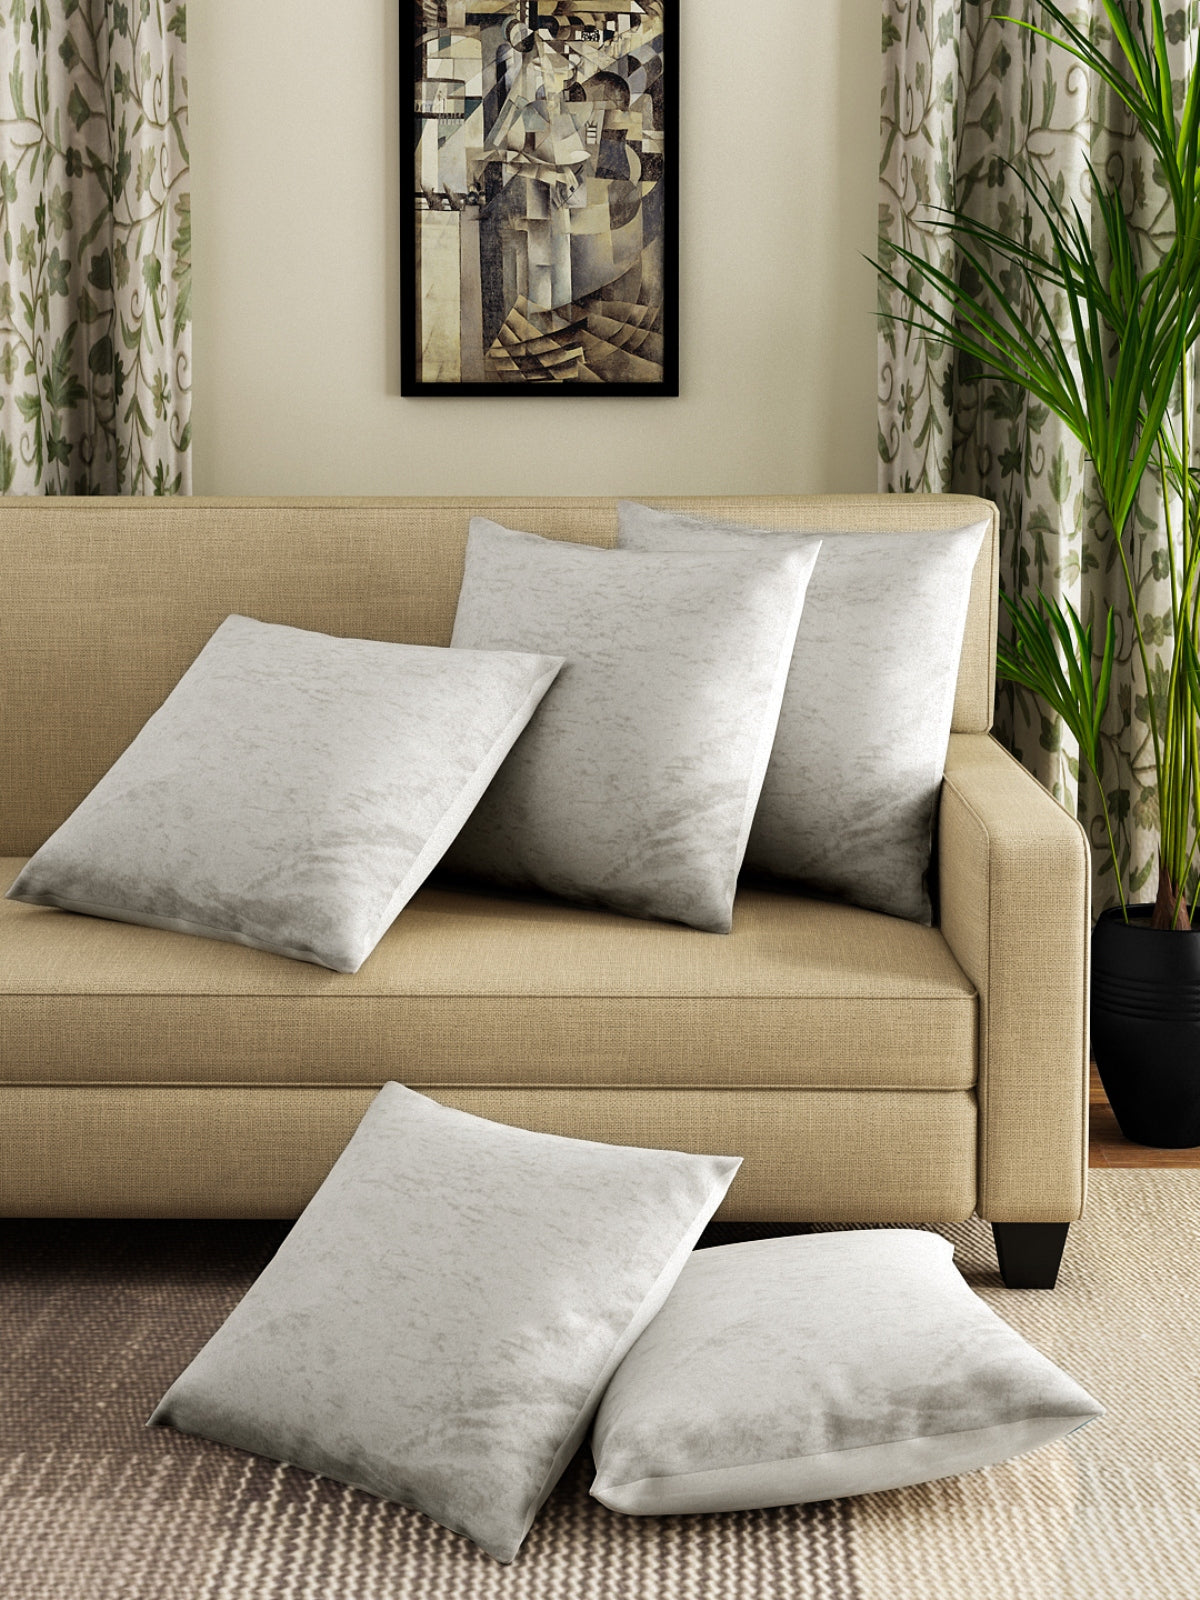 Solid Velvet Cushion Cover, 16x16-inch (Silver) - Set of 5